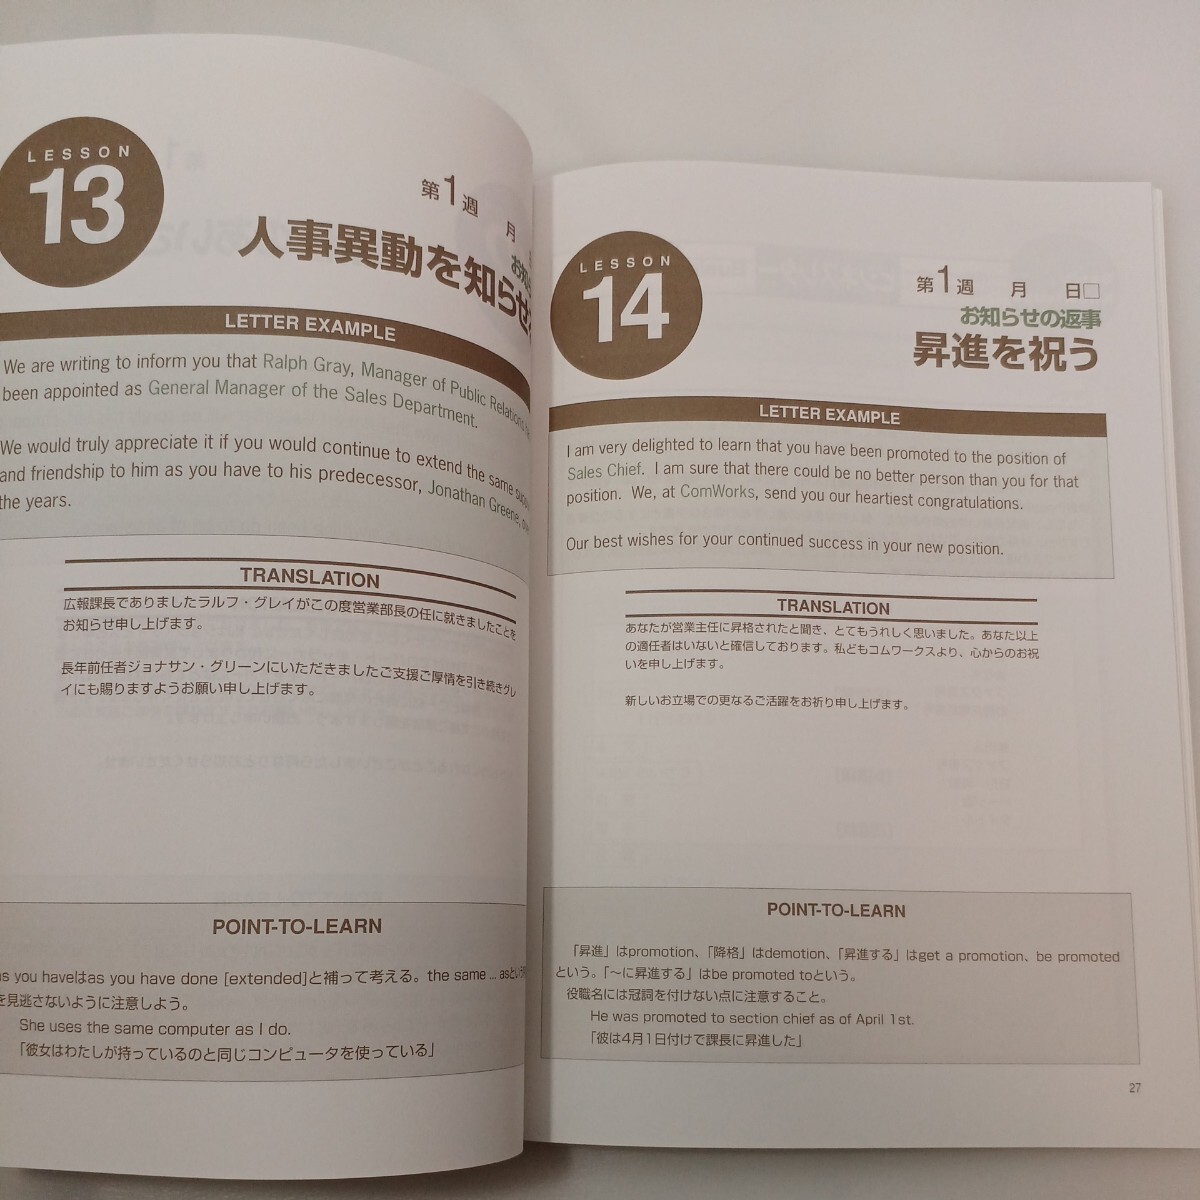 zaa-559! immediately possible to use work. English (BUSINESS ENGLISH)3 pcs. set ① basis table reality compilation ② telephone compilation ③ business letter /E mail compilation Japan talent proportion association 